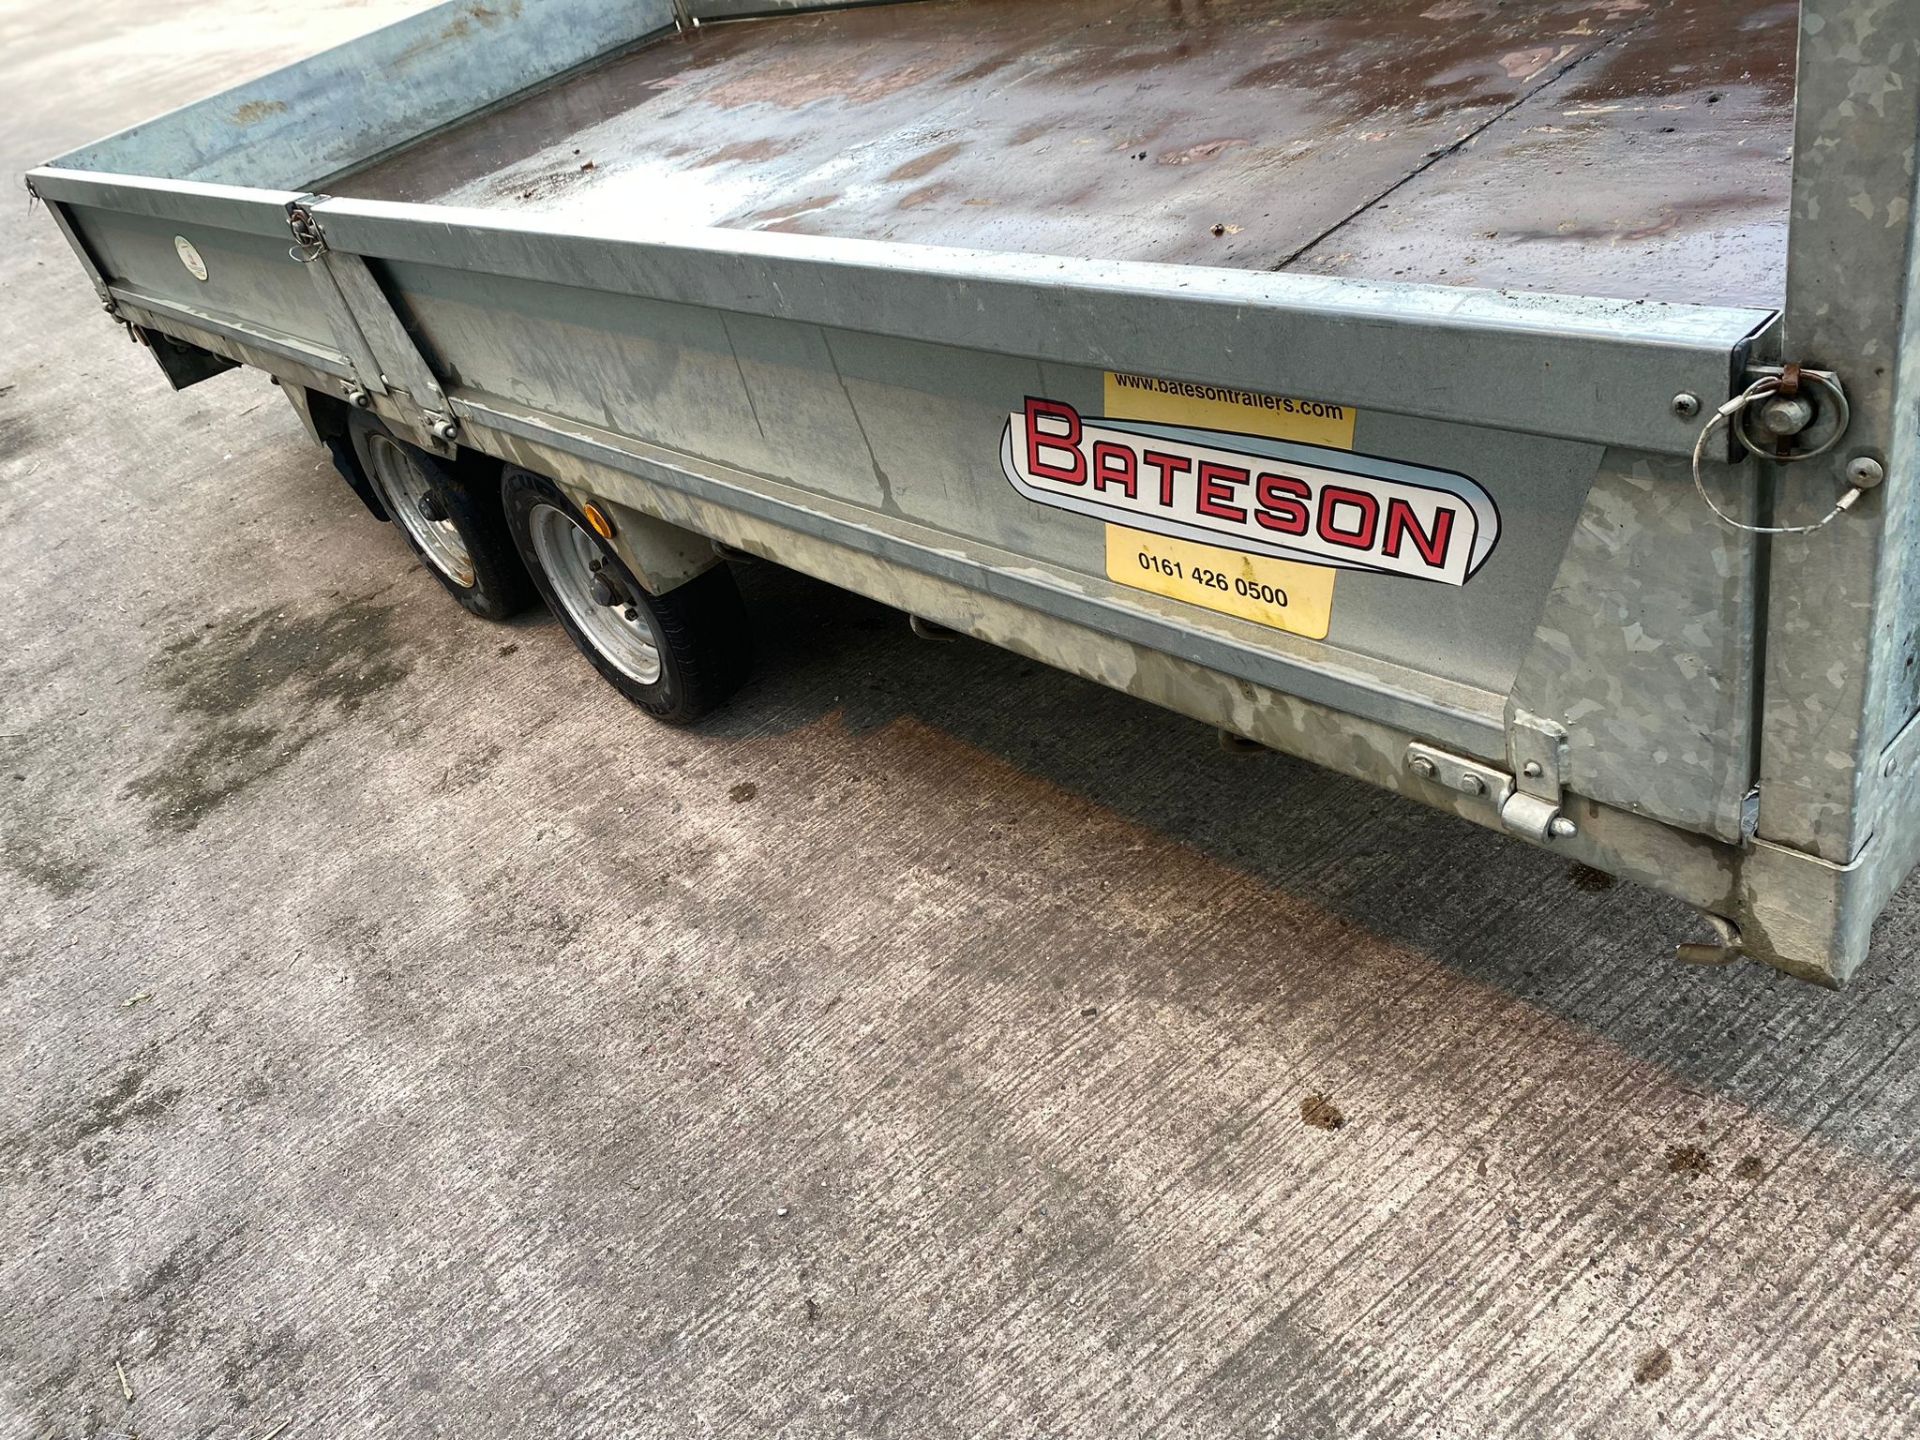 2007 BATESON TRAILER - IN VERY GOOD CONDITION WITH RAMPS, BRAKES ALL WORK, LIGHTS ALL WORK - Image 9 of 11